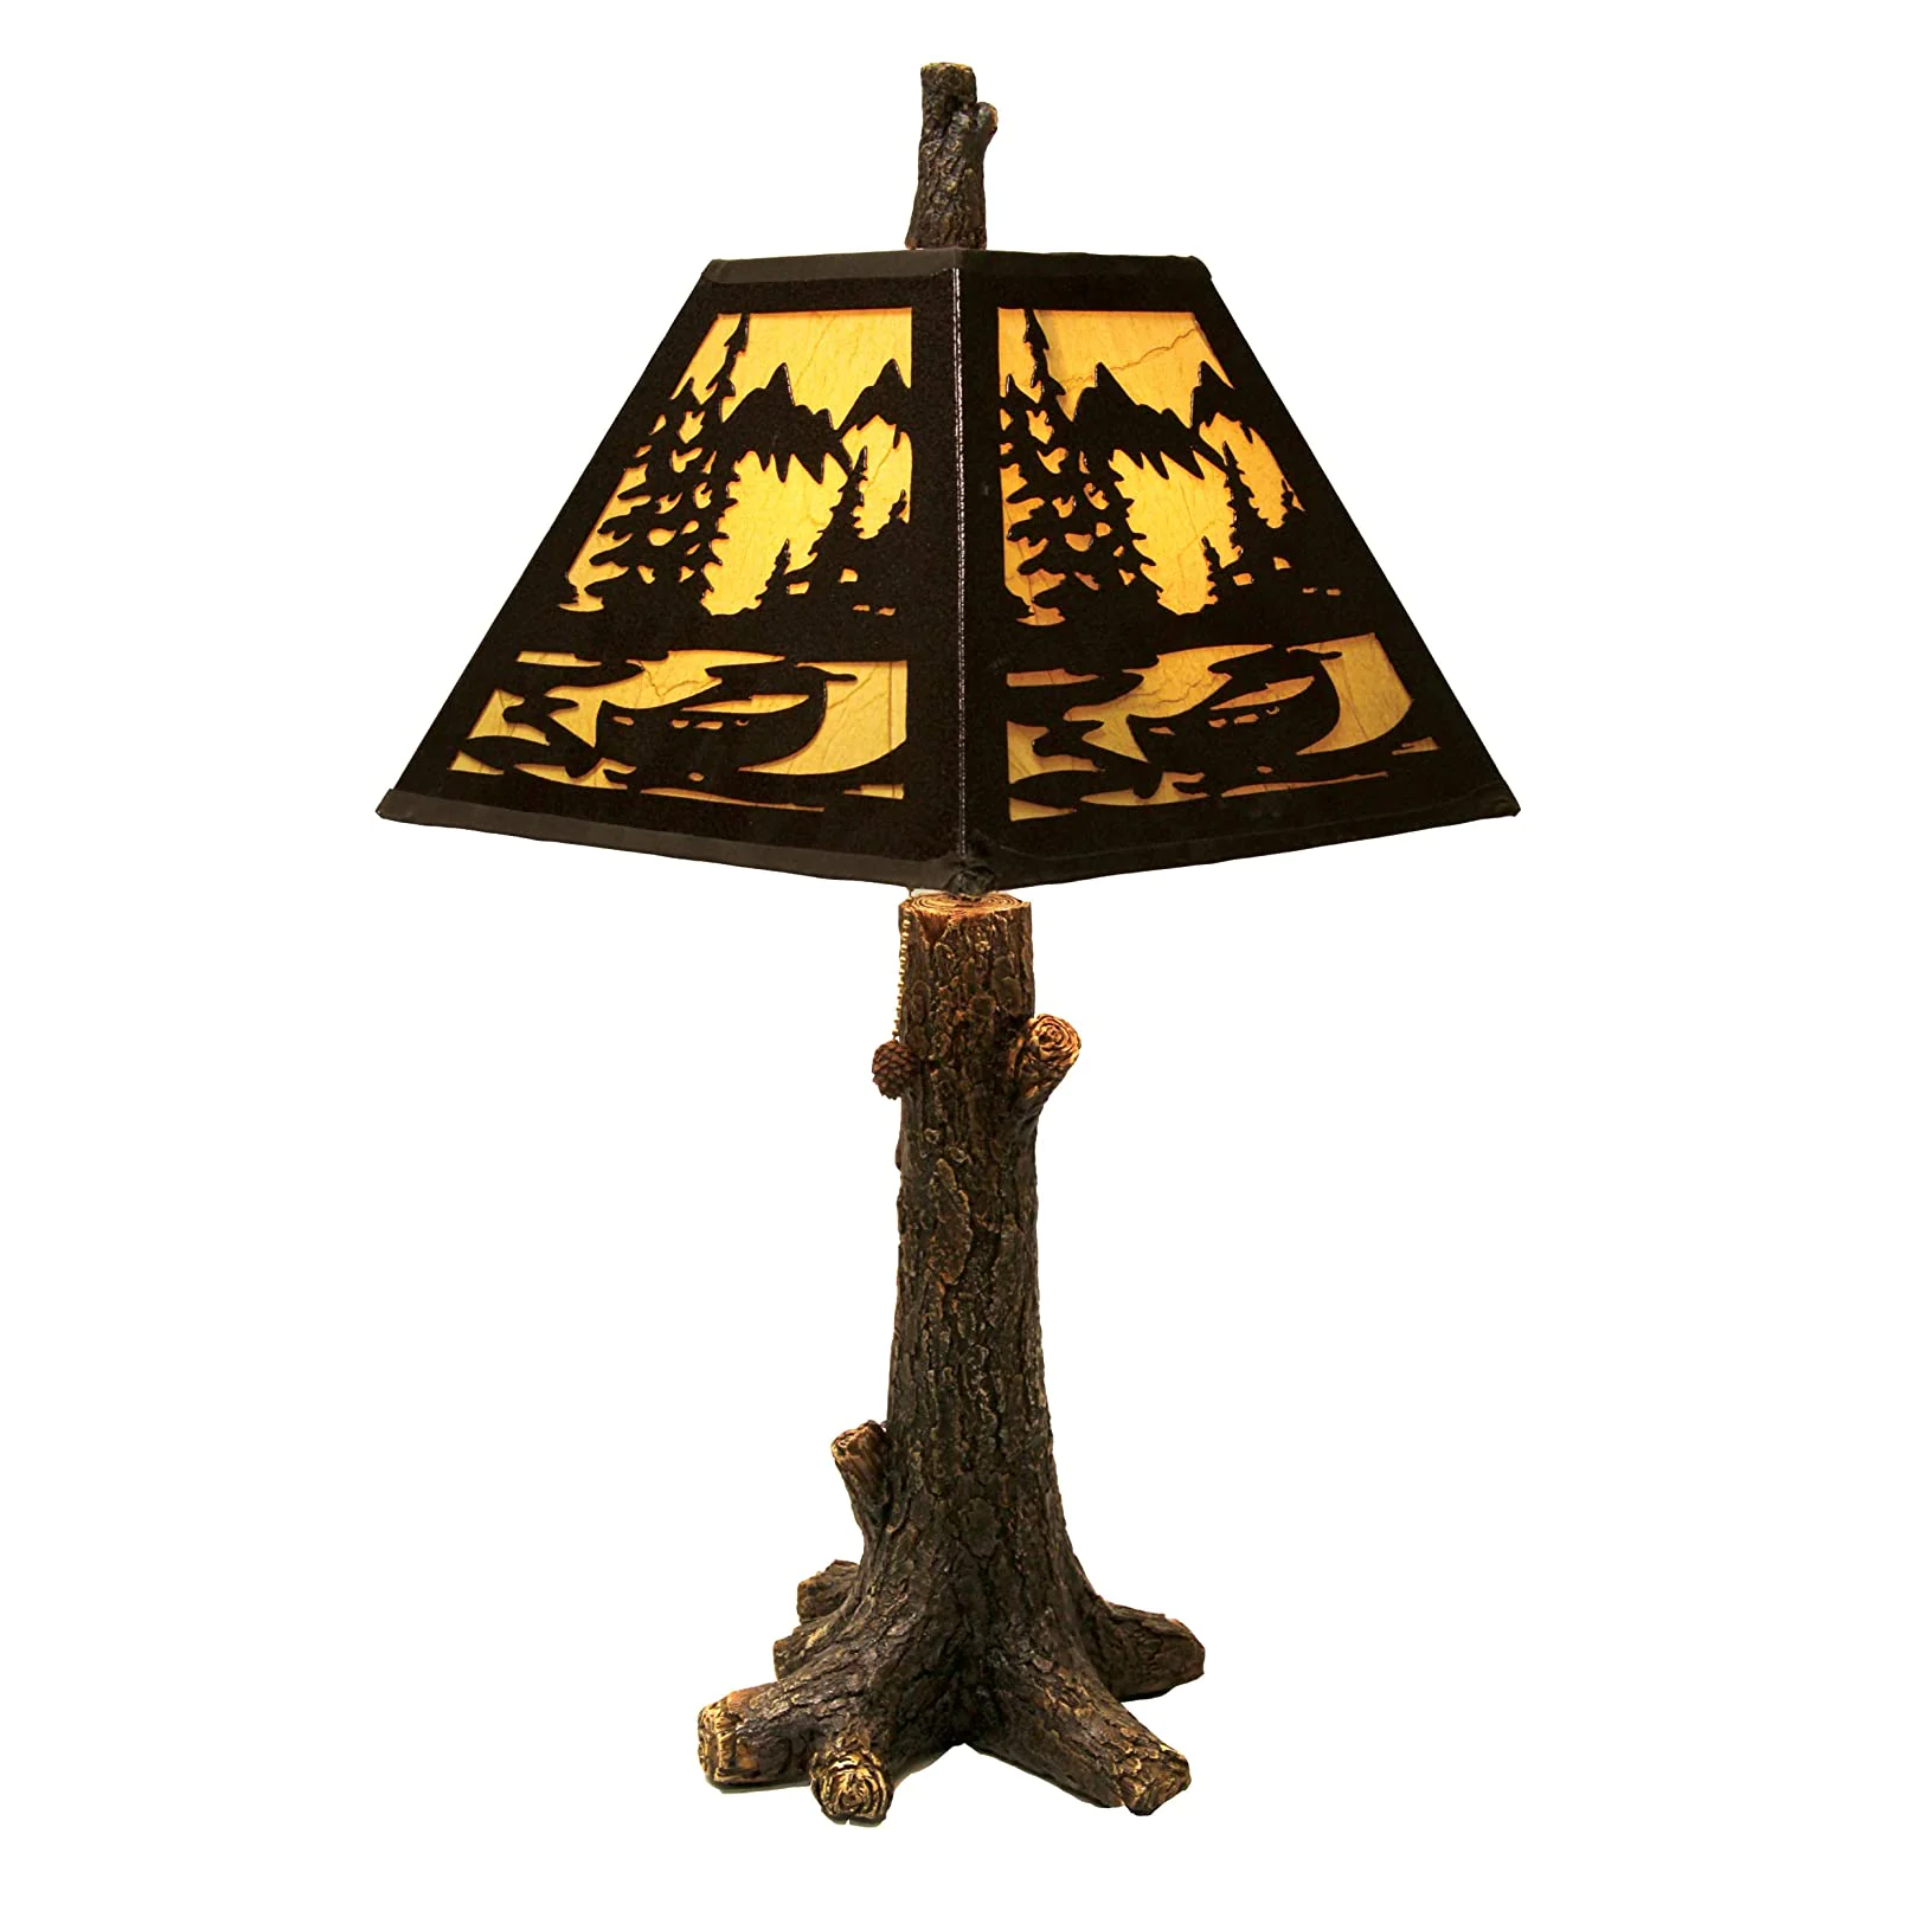 Rivers Edge Products Table Lamp - Rustic Tree Metal Shade